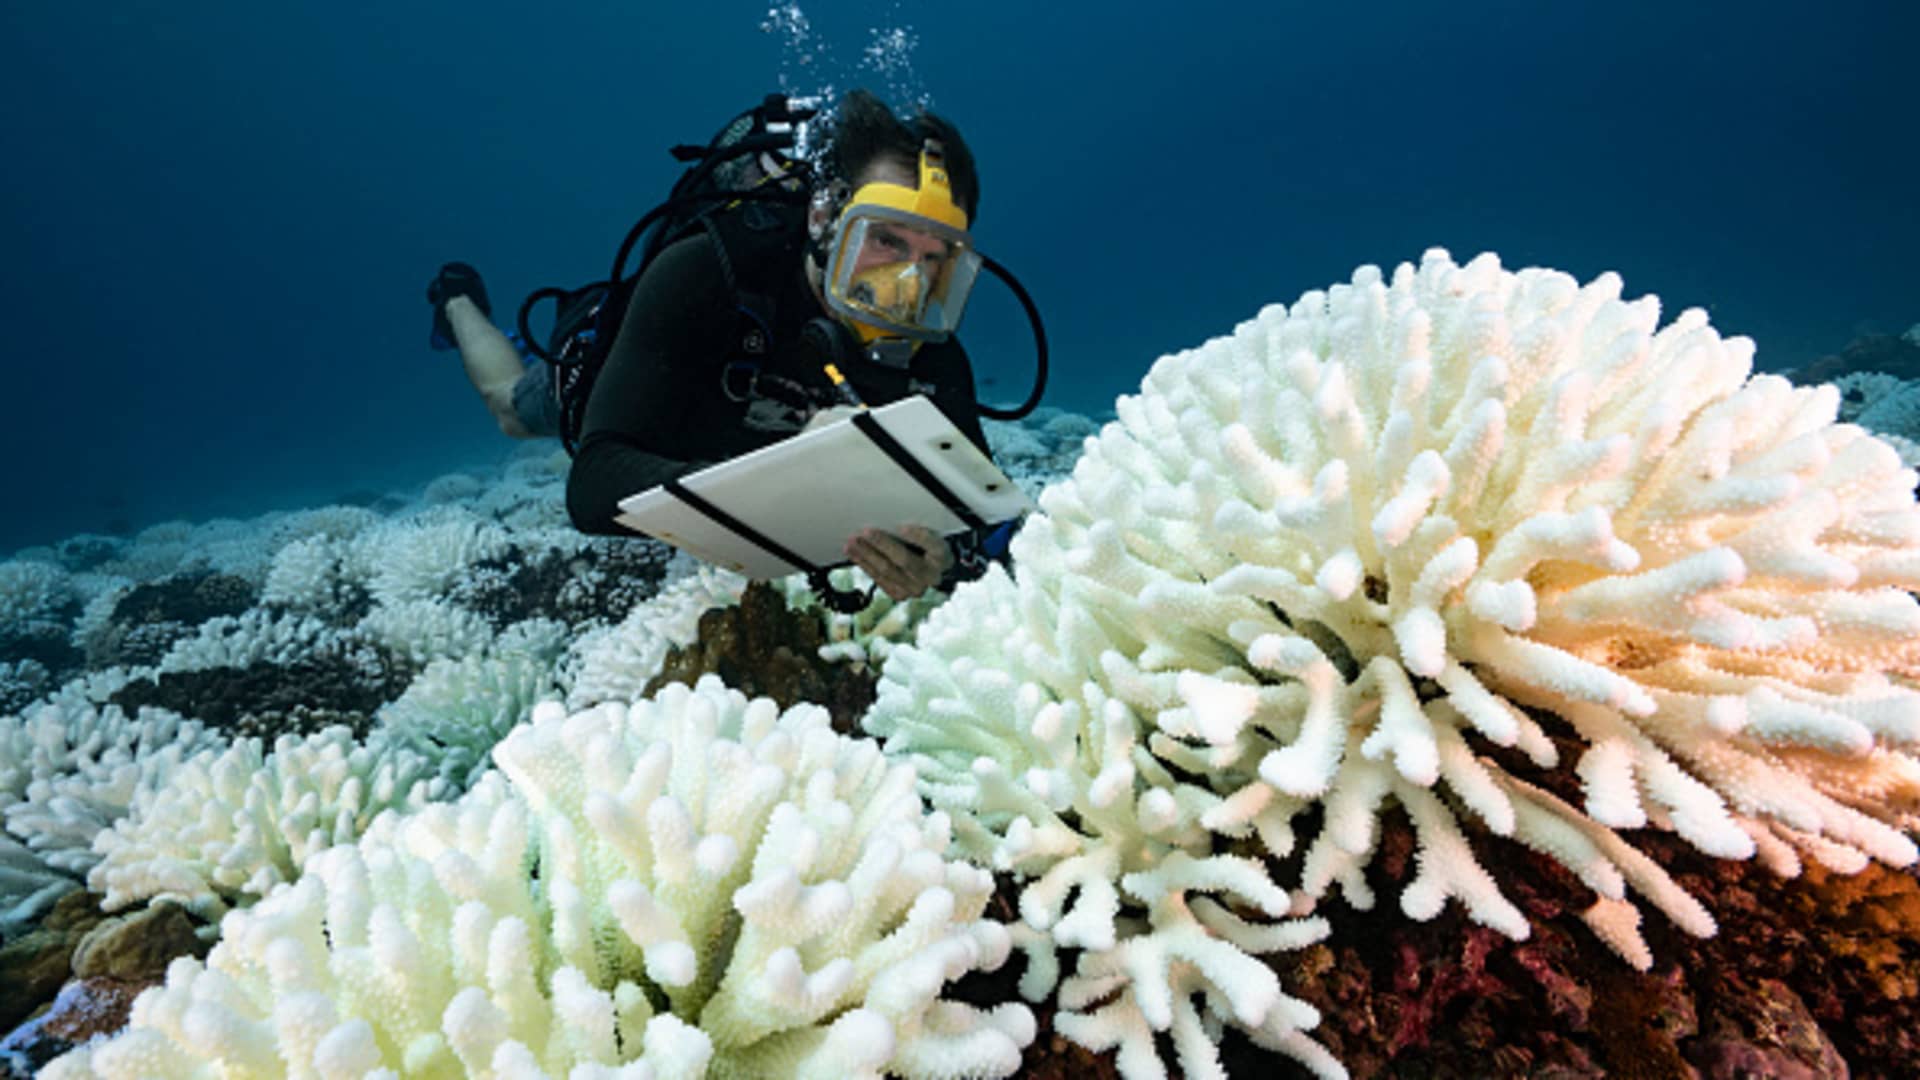 A diver checks the coral reefs of the Society Islands in French Polynesia. on May 9, 2019 in Moorea, French Polynesia.